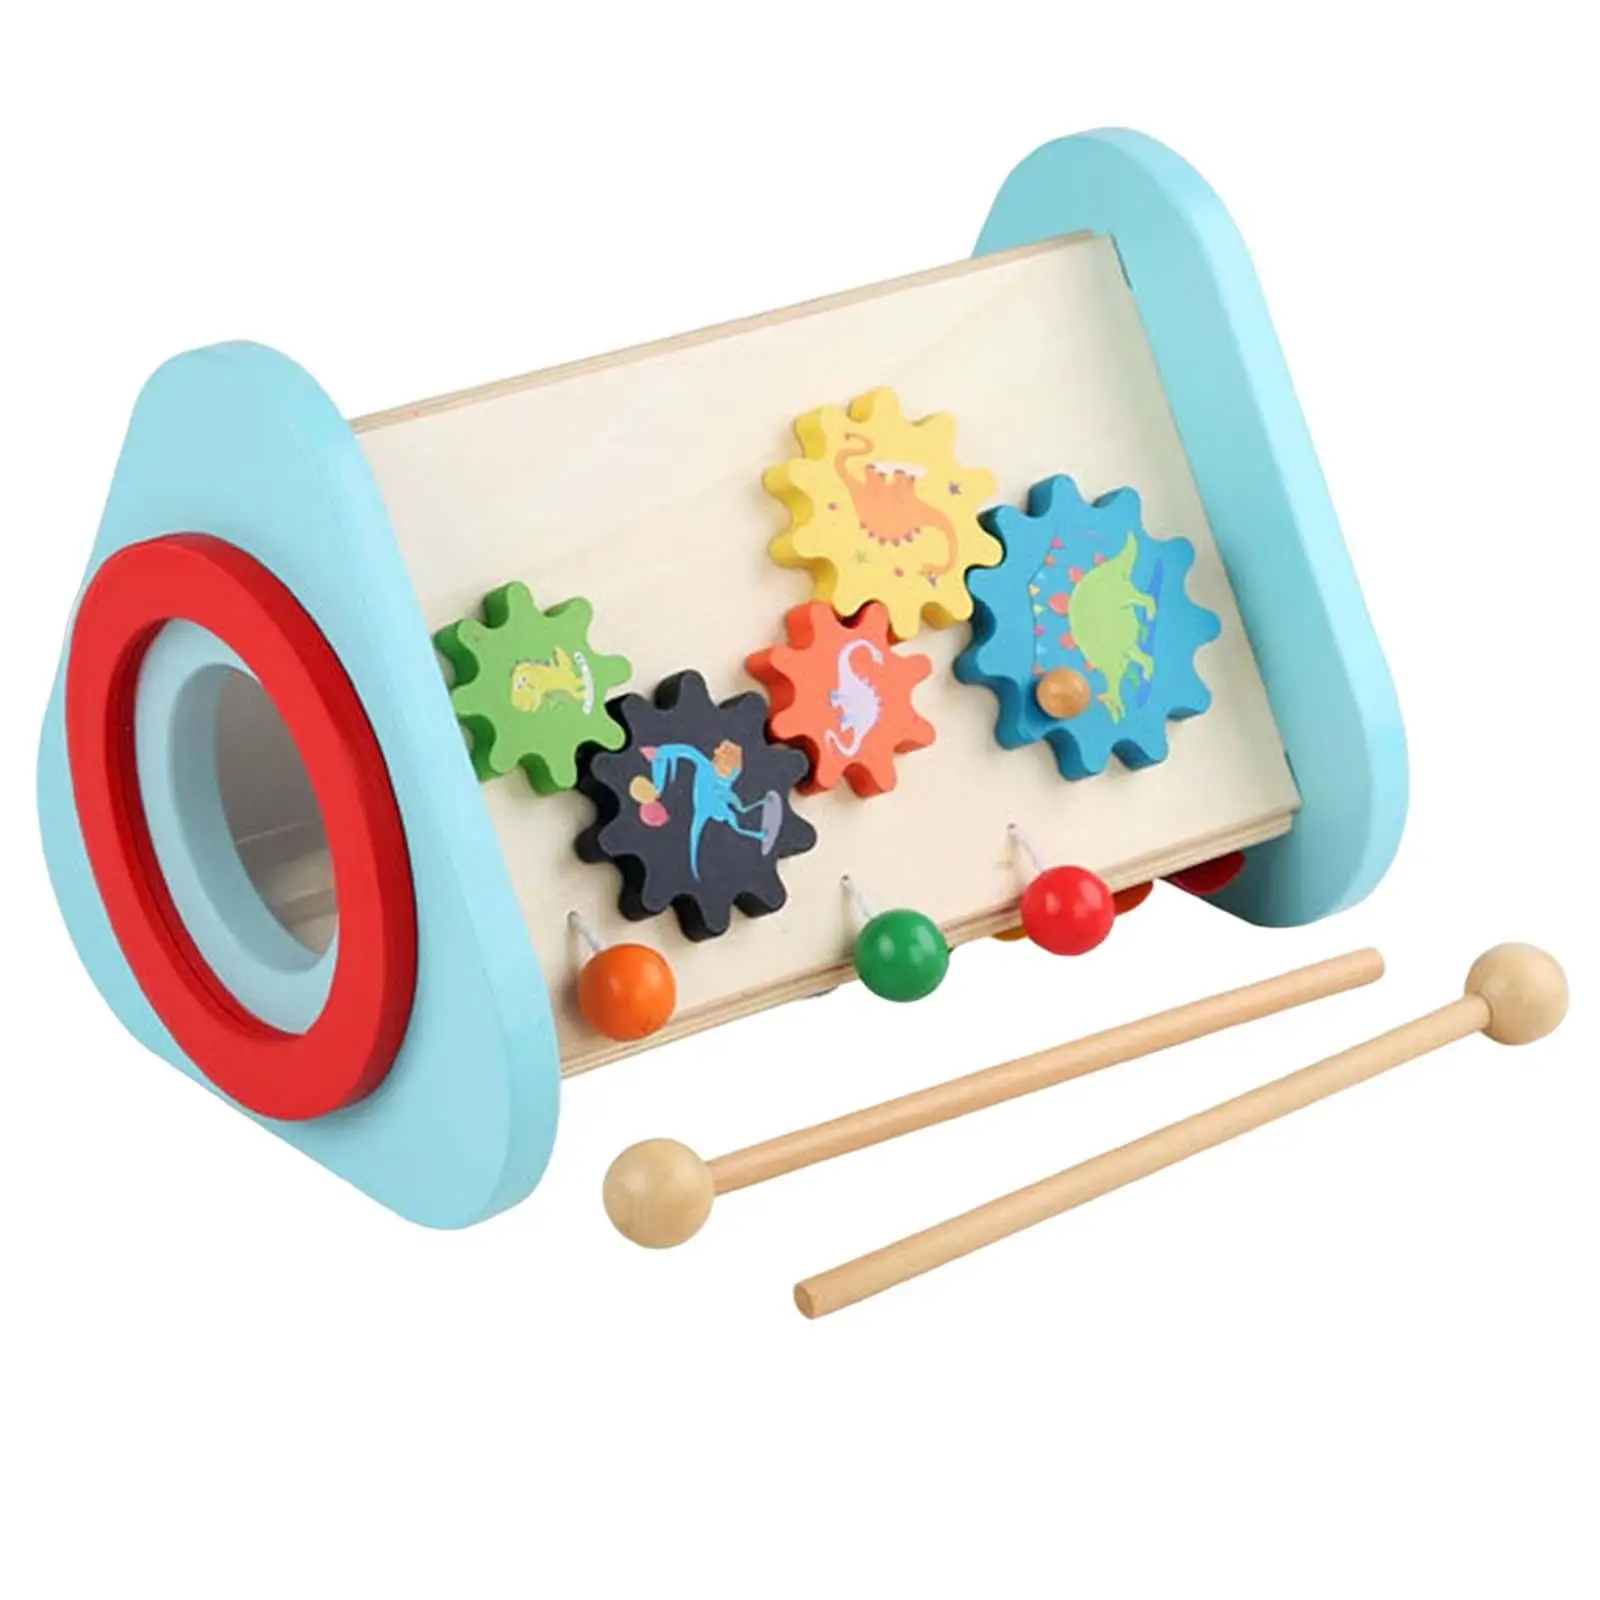 5 in 1 Wooden Music Toy Early Learning Fine Motor Skills Sturdy Colorful Multifunctional Baby Musical Instruments Toy for Gifts